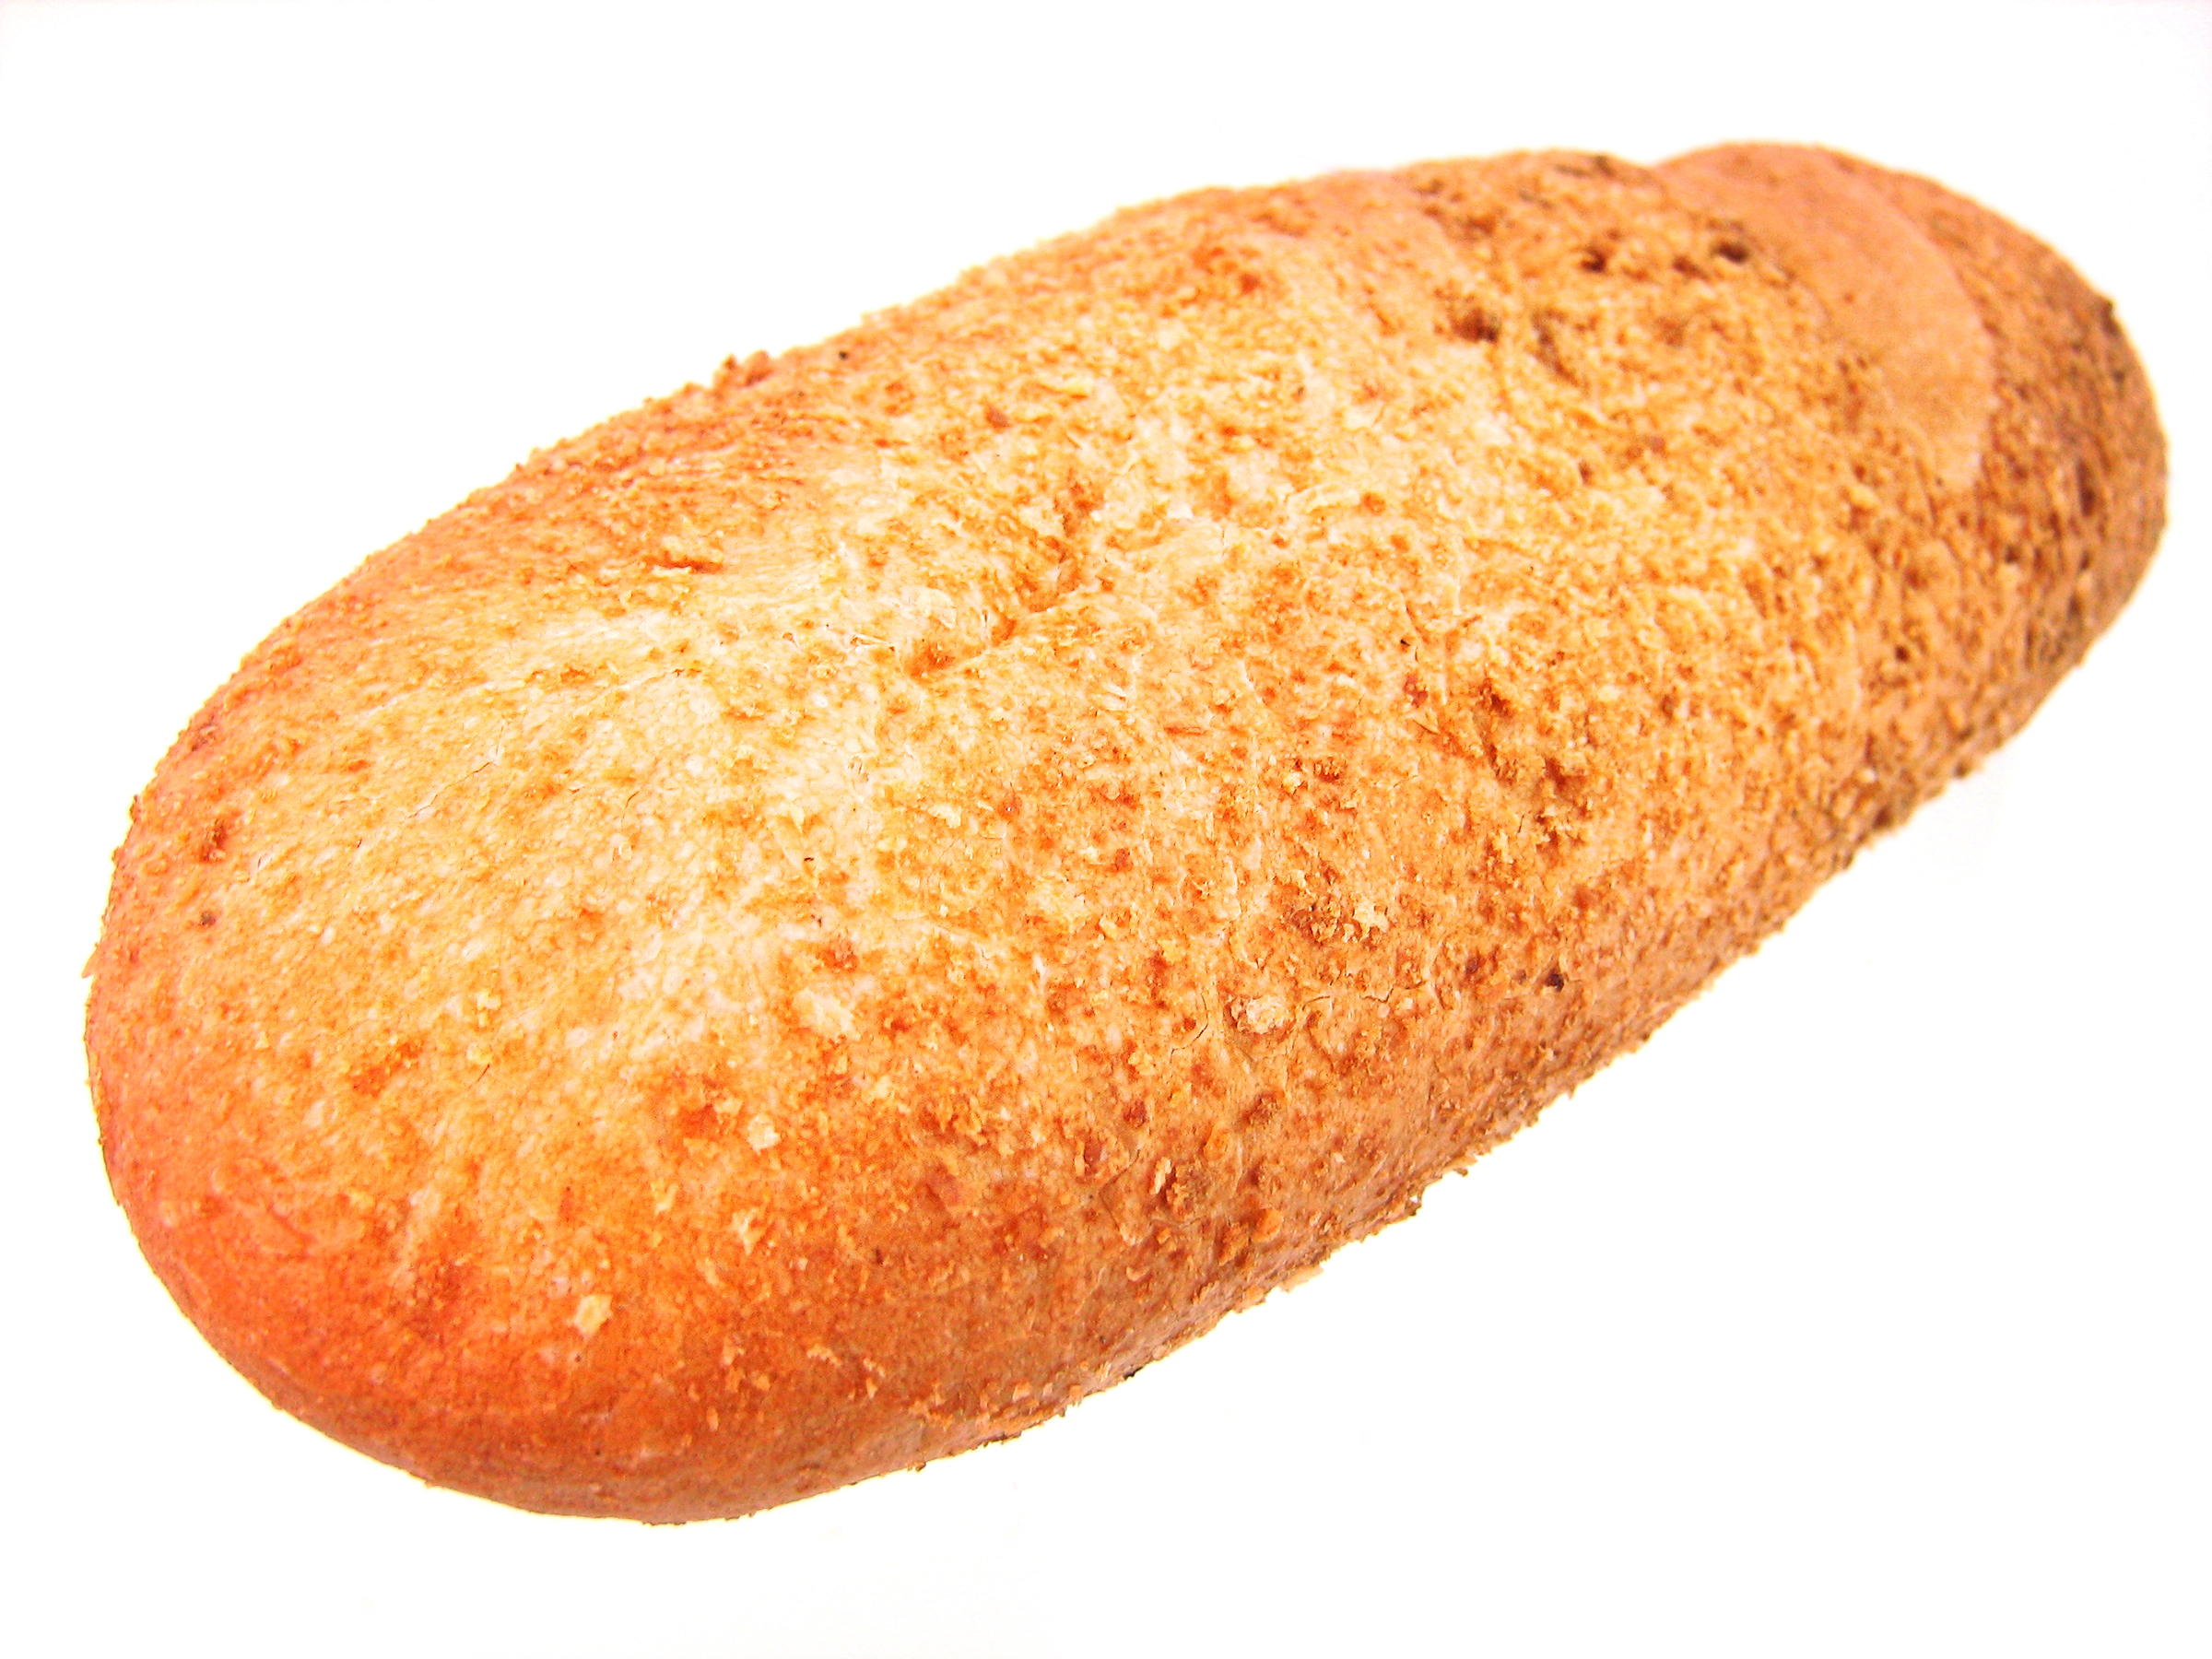 Bread Loaf, Baked, Healthy, Whole, White, HQ Photo